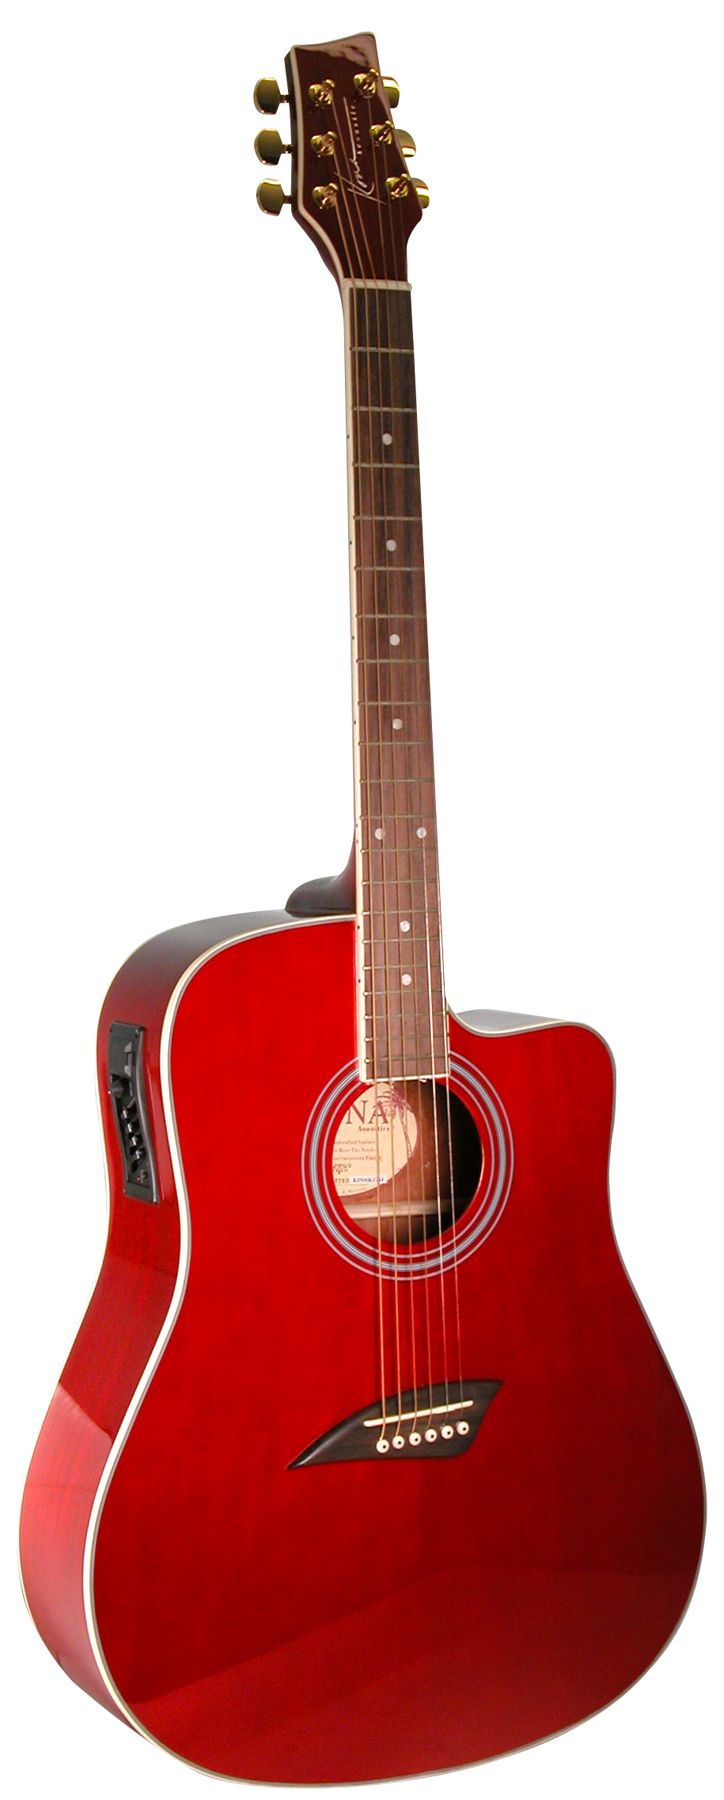 Kona Dreadnought Acoustic-Electric Spruce Top Guitar with High-Gloss Transparent Red Finish